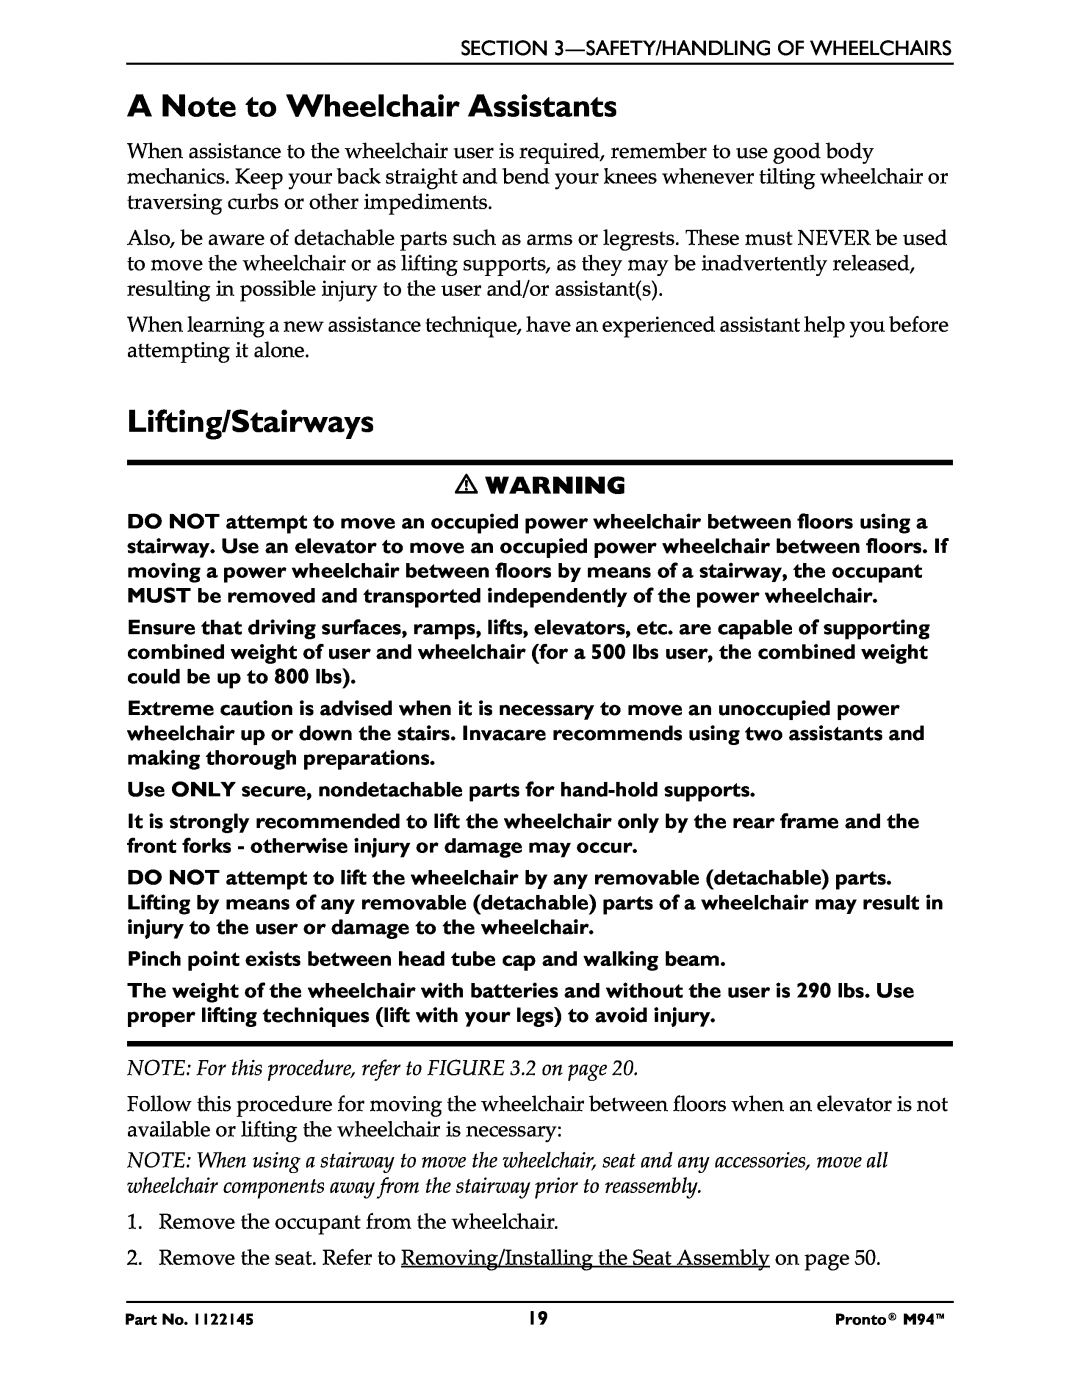 Invacare Pronto M71 manual A Note to Wheelchair Assistants, Lifting/Stairways 